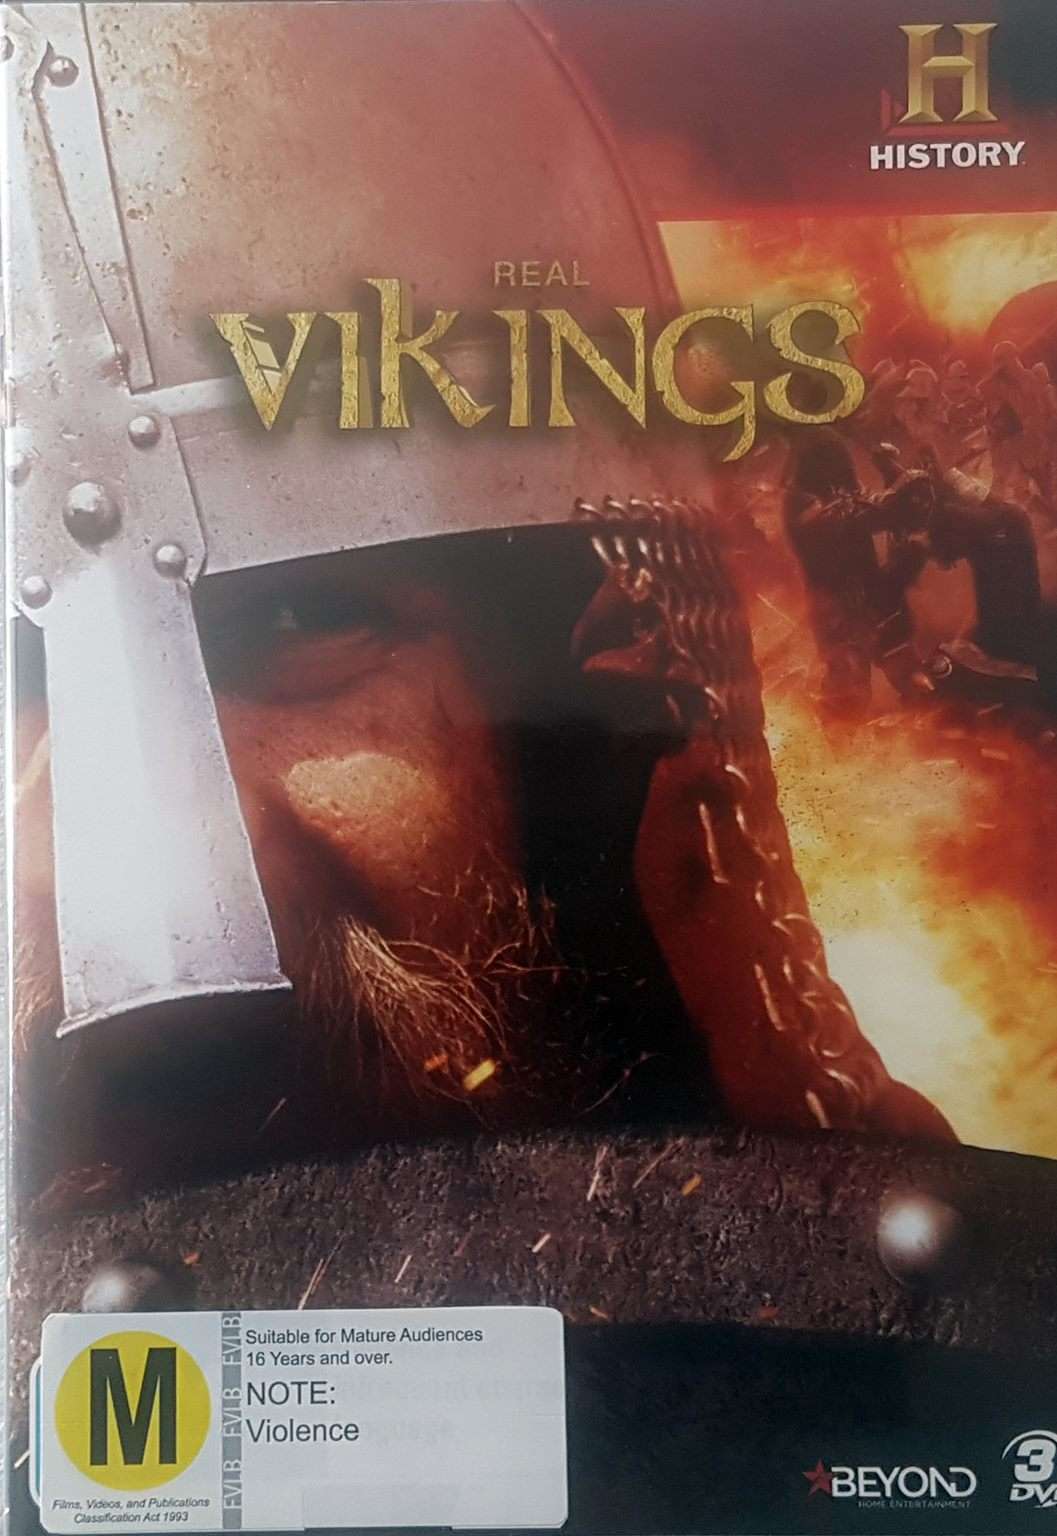 Real Vikings 3 Disc Set: History Channel